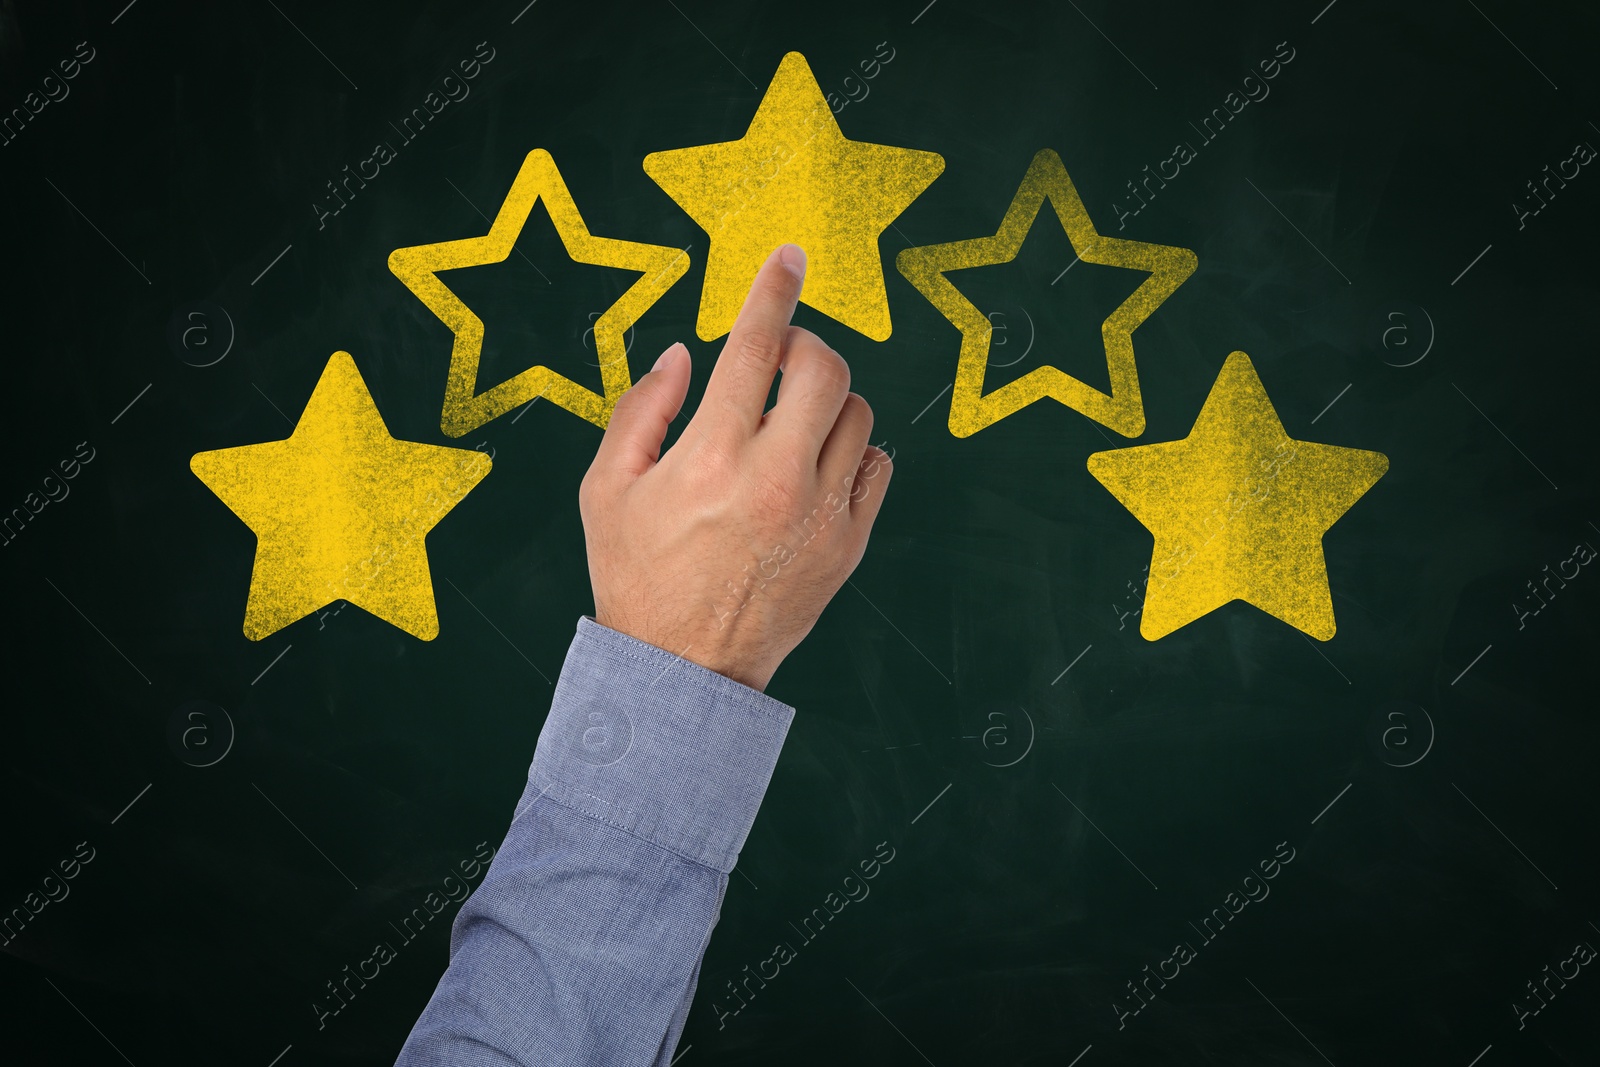 Image of Quality evaluation. Man touching golden star on green chalkboard, closeup